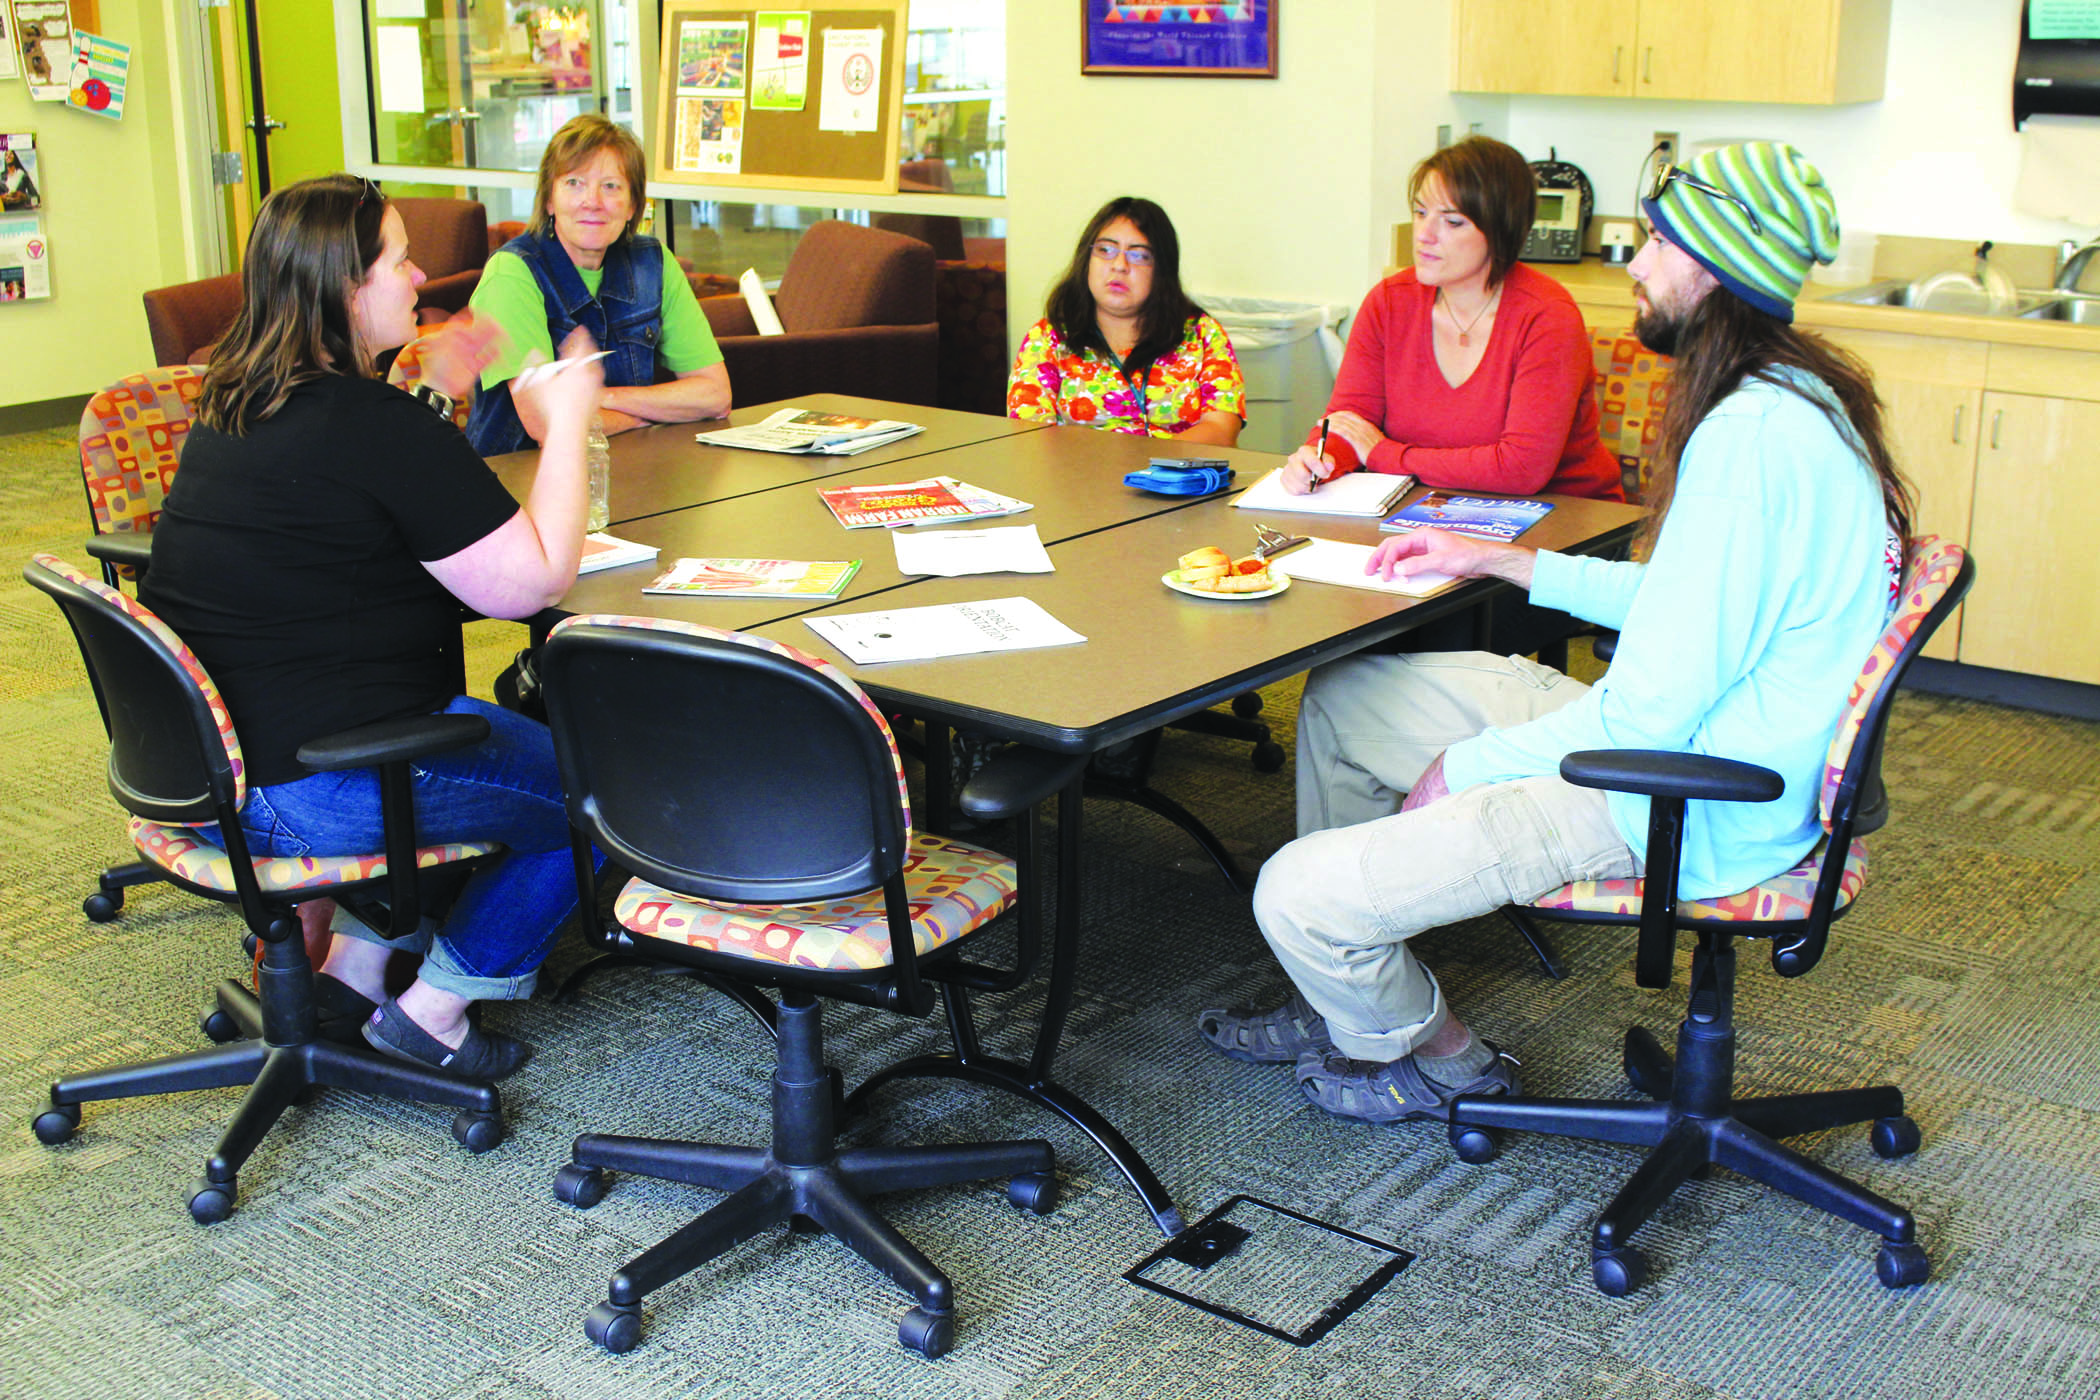 On Friday, OCt. 2, the COCC Garden Club members meet to discuss the upcoming year, their hopes to attract more students and the ways in which they are going to impact the community.